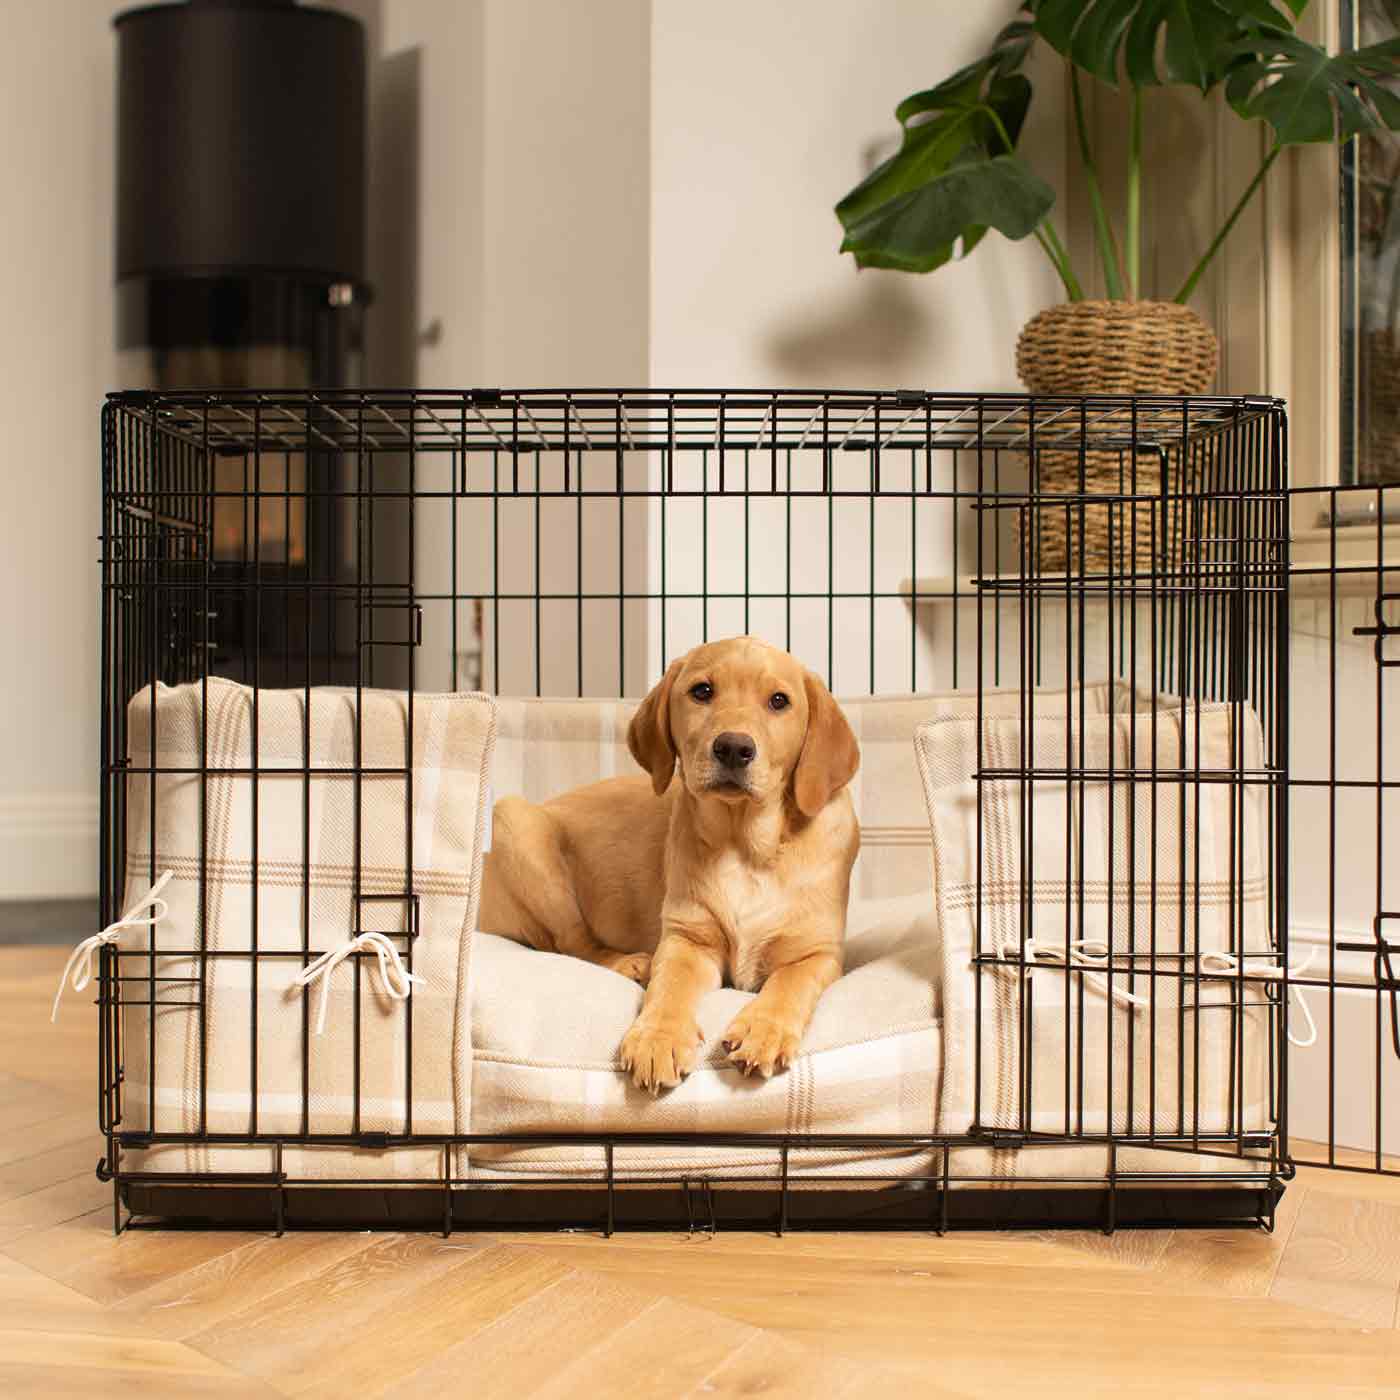 Luxury Dog Cage Bumper, Balmoral Natural Tweed Cage Bumper Cover The Perfect Dog Cage Accessory, Available To Personalize Now at Lords & Labradors US